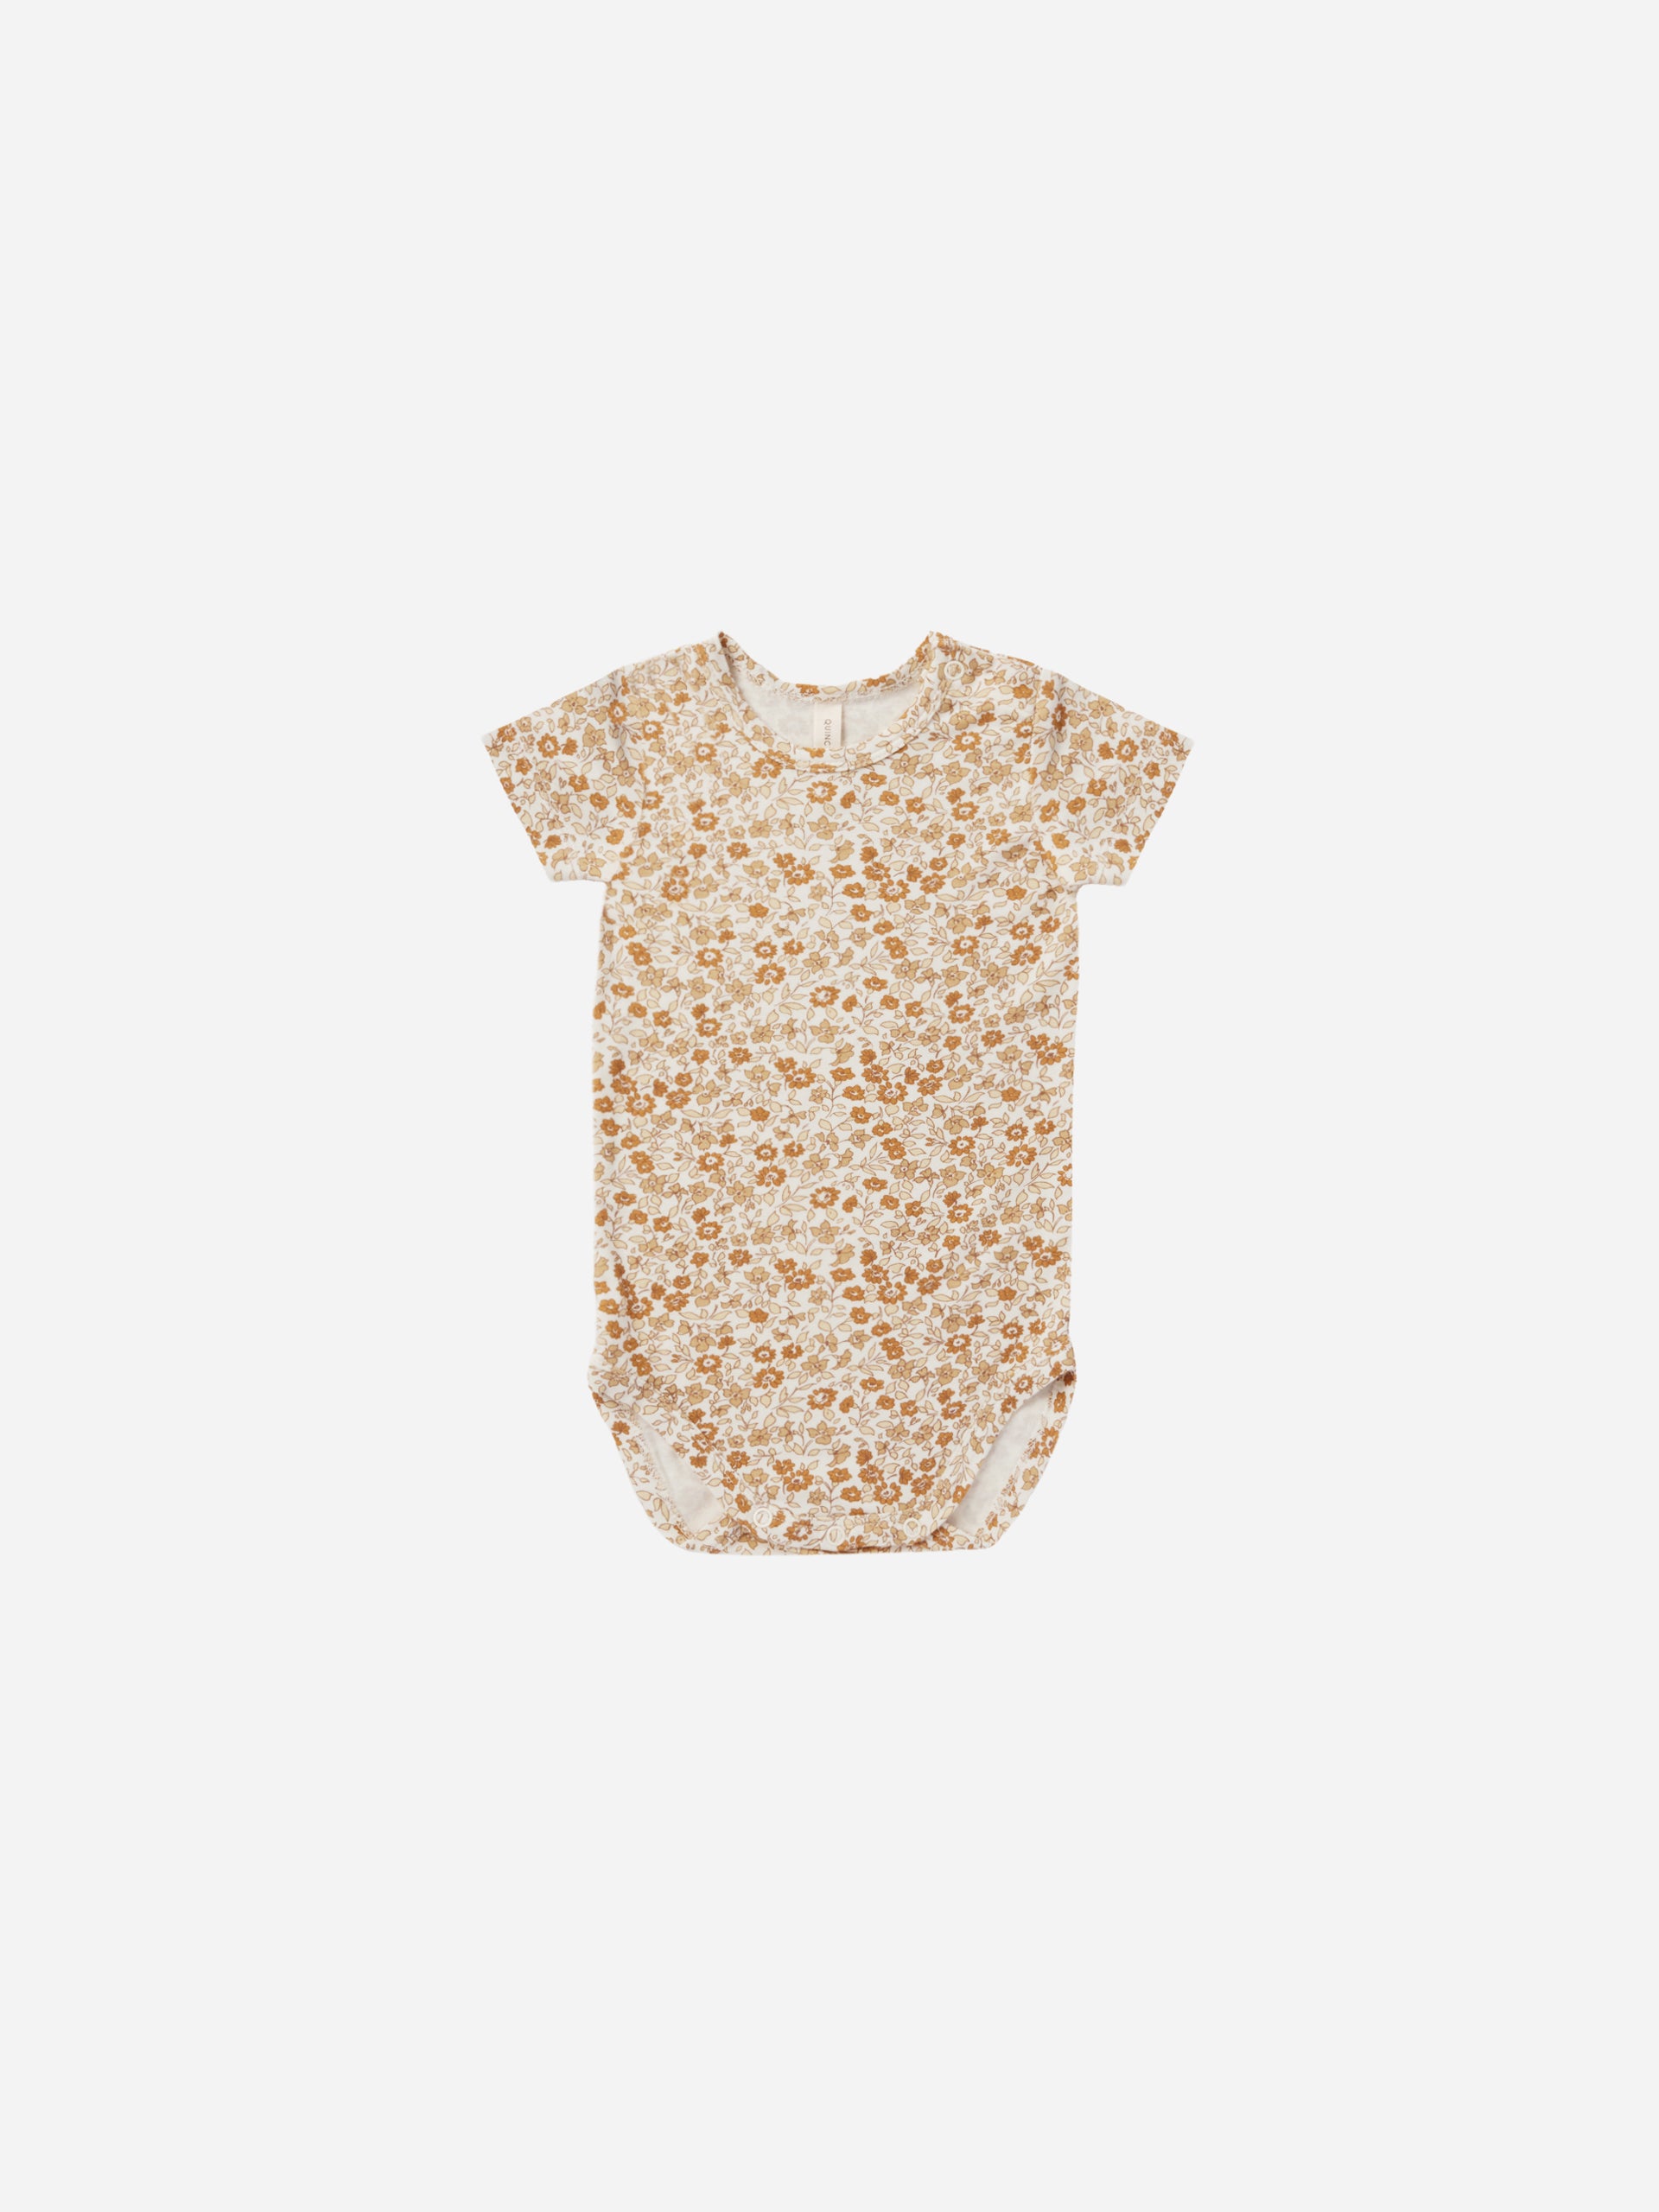 Bamboo Short Sleeve Bodysuit || Marigold - Rylee + Cru | Kids Clothes | Trendy Baby Clothes | Modern Infant Outfits |